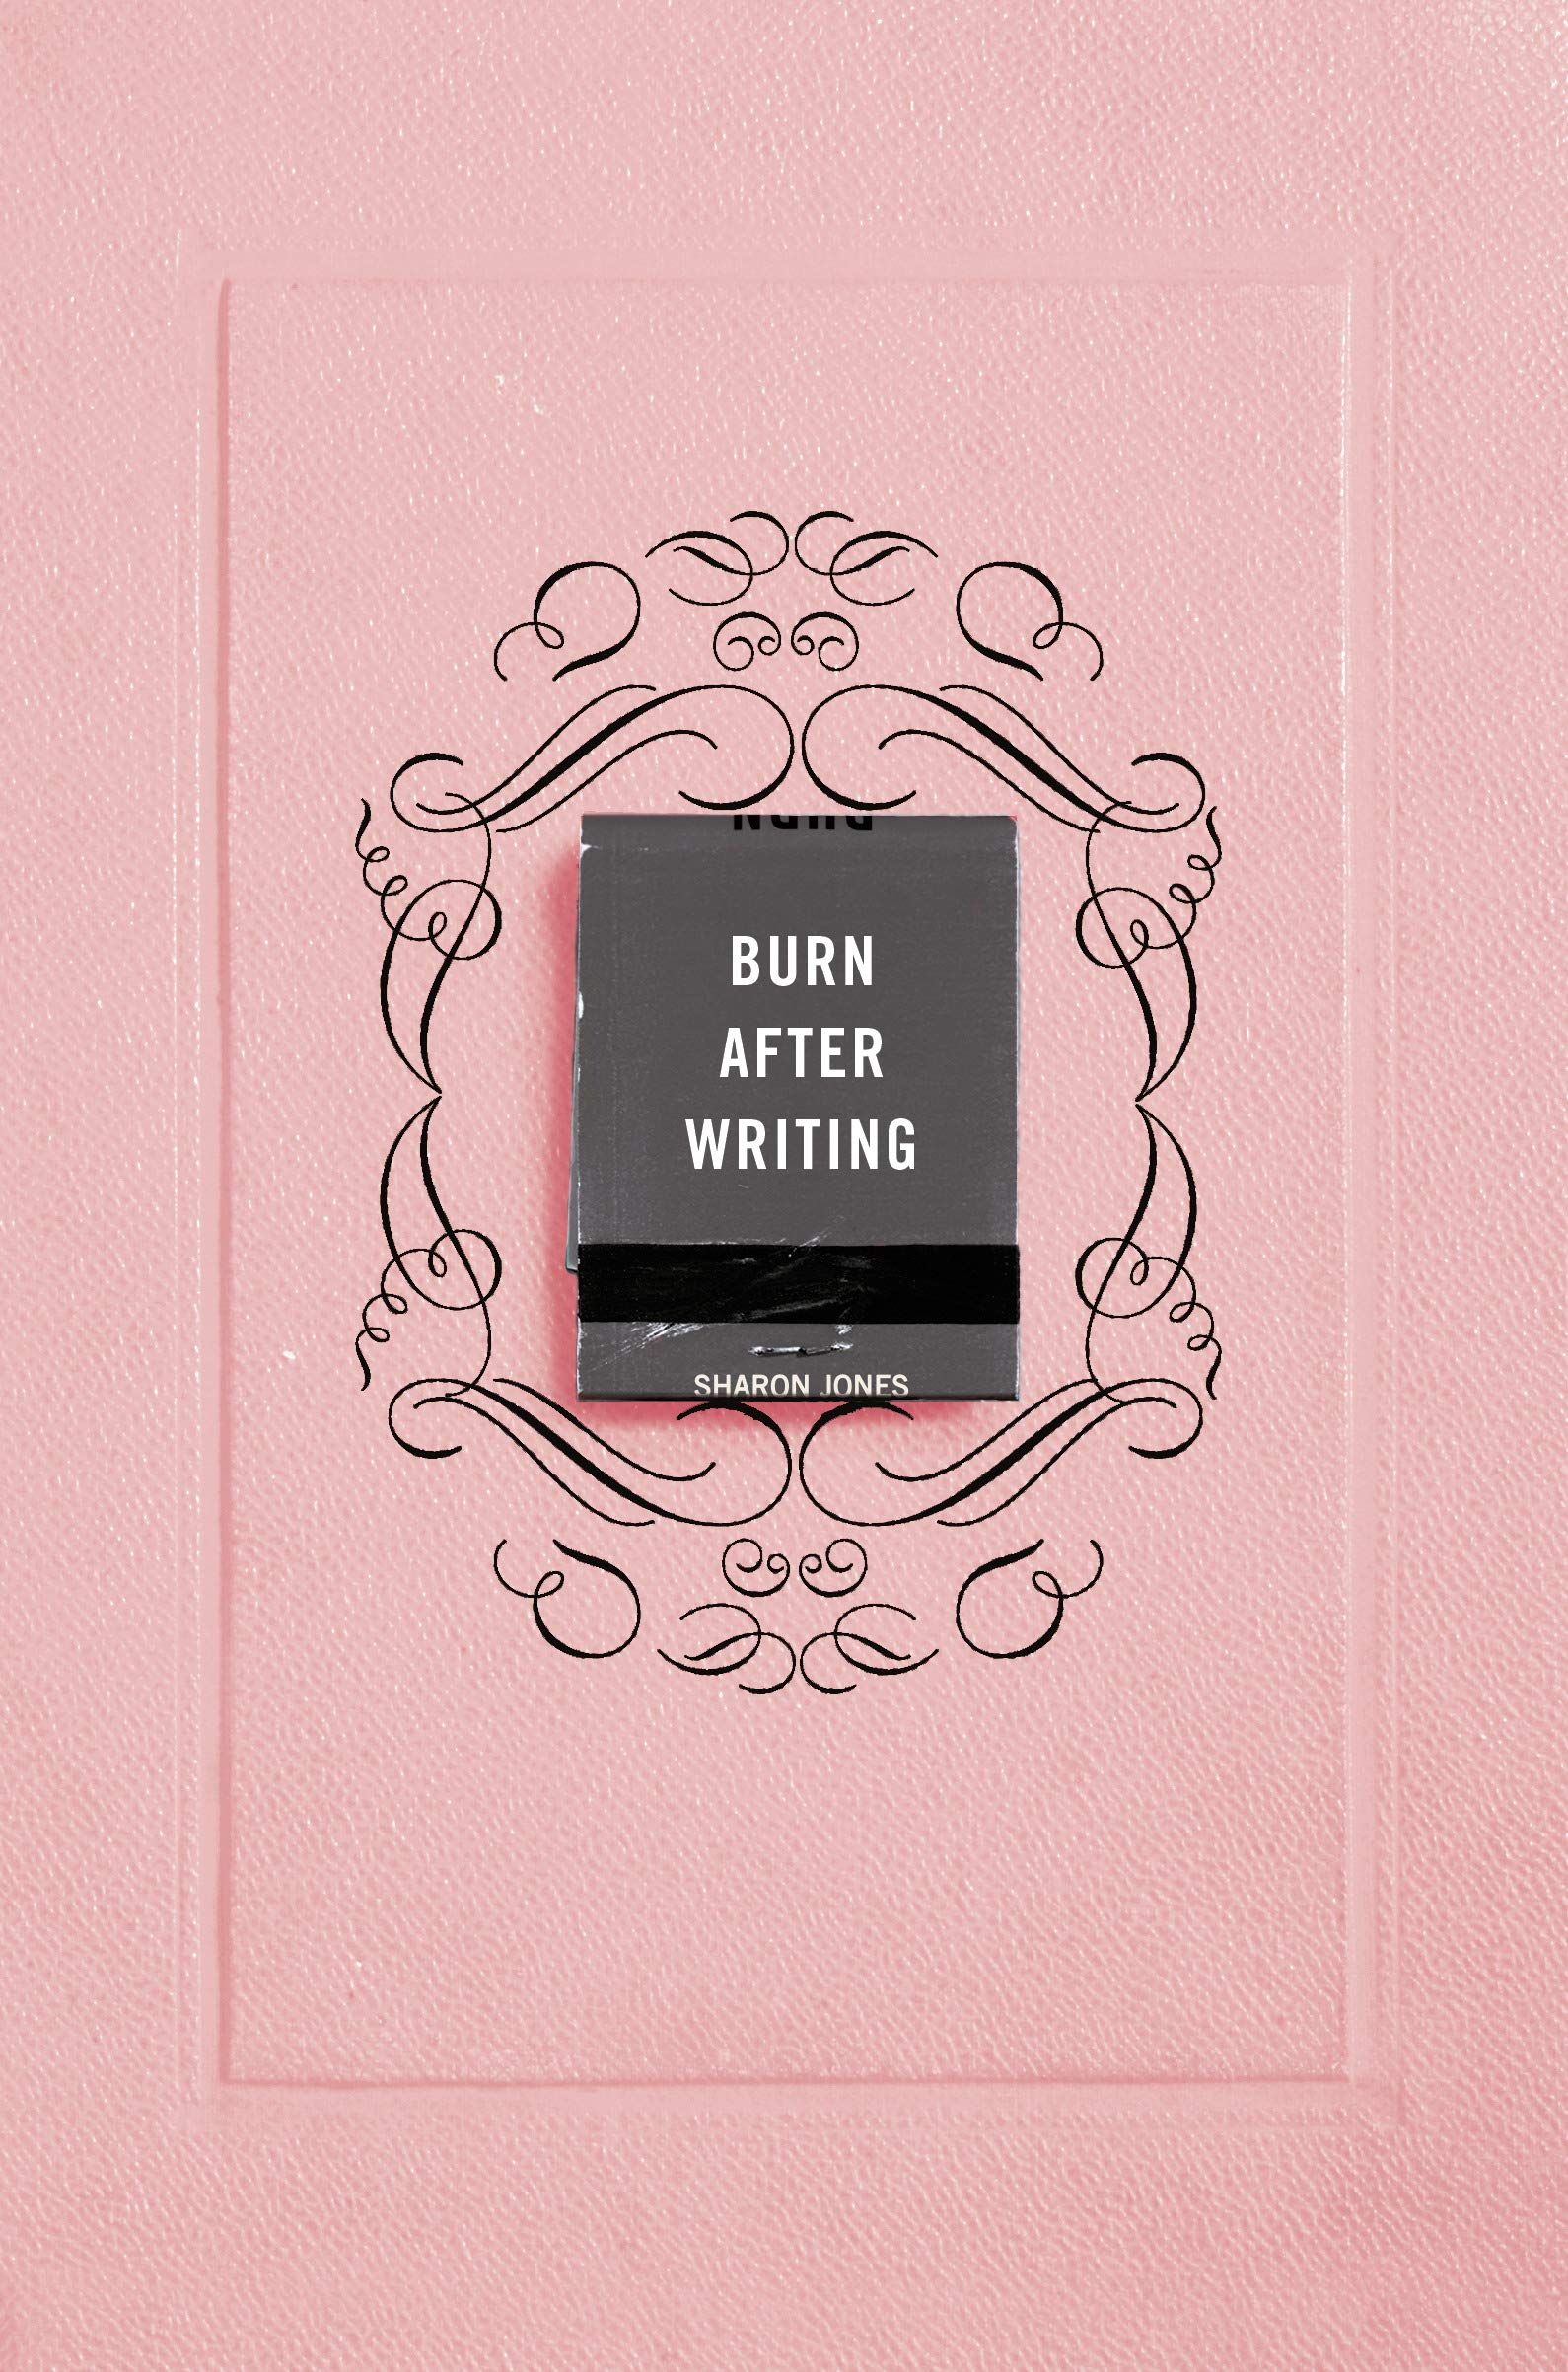 burn after writing blue